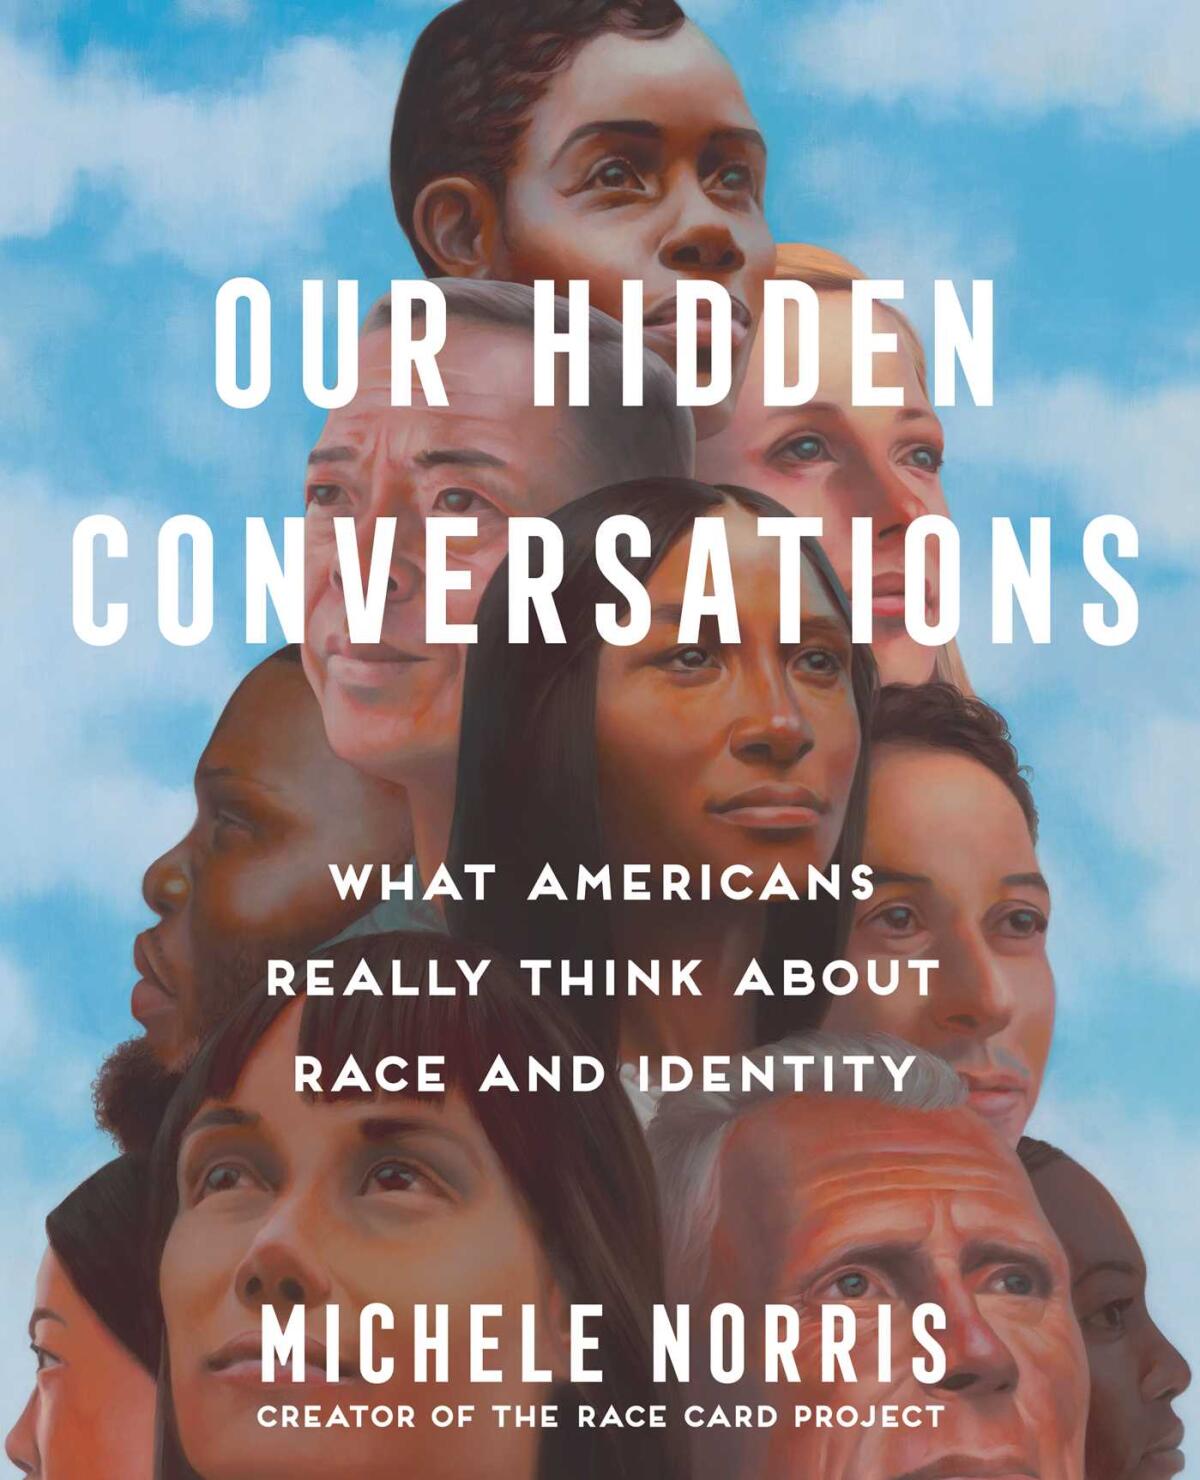 "Our Hidden Conversations" by Michele Norris